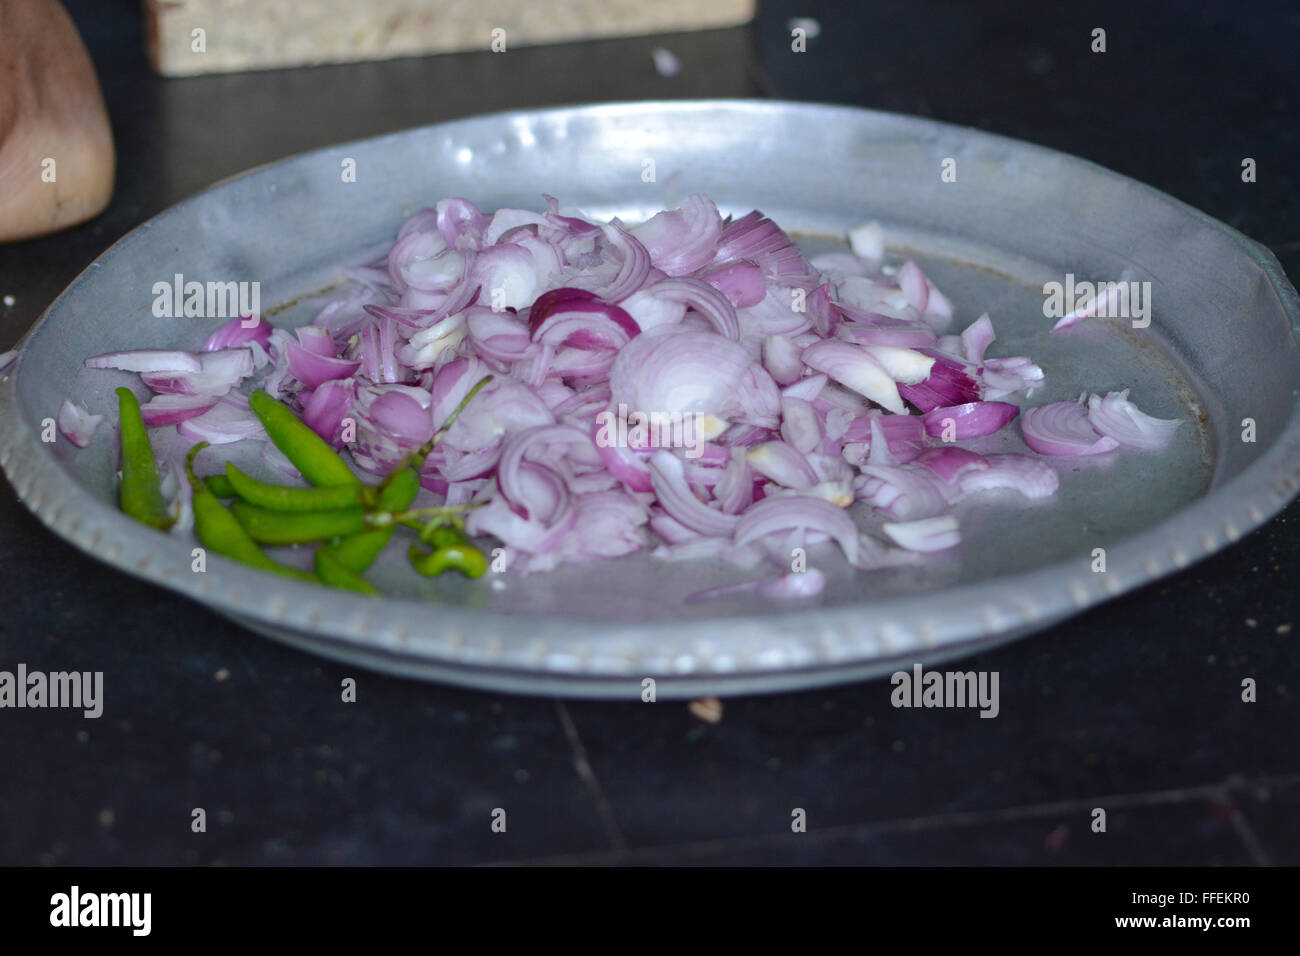 Mumbai, India - October 28, 2015 - Woman cutting chili and onions on a traditional cutting stool  in indian kitchen Stock Photo